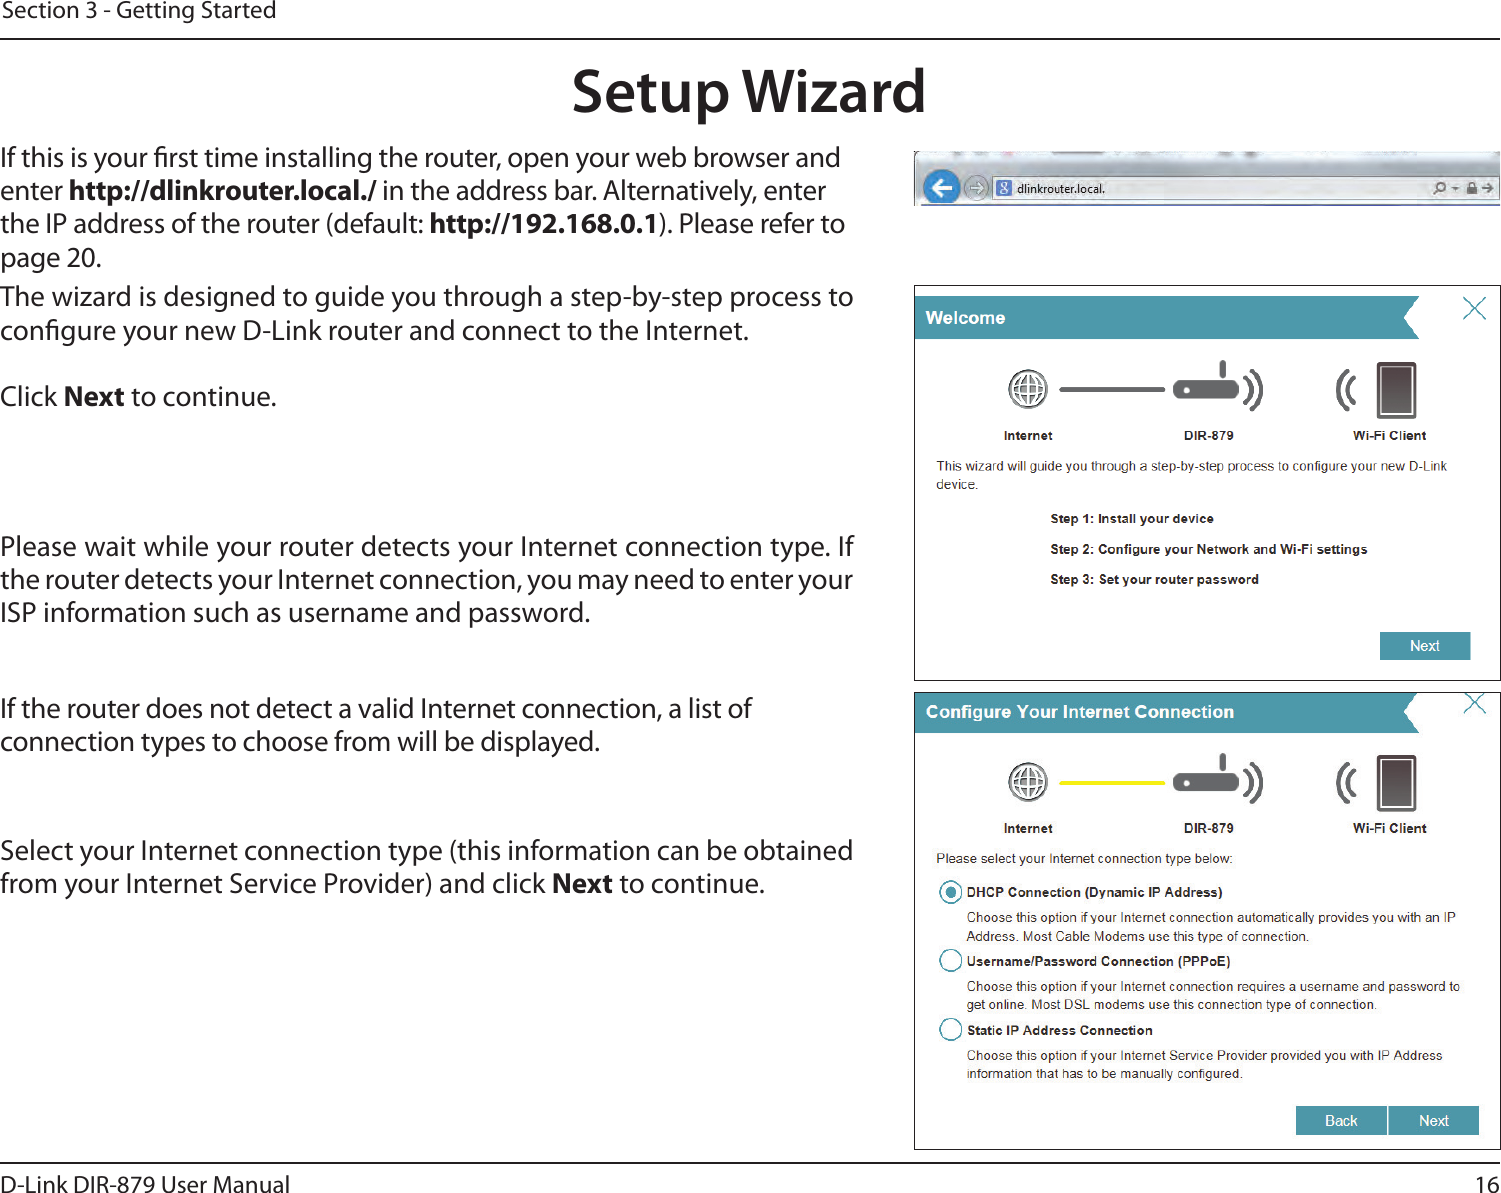 16D-Link DIR-879 User ManualSection 3 - Getting StartedThe wizard is designed to guide you through a step-by-step process to congure your new D-Link router and connect to the Internet.Click Next to continue. Setup WizardIf this is your rst time installing the router, open your web browser and enter http://dlinkrouter.local./ in the address bar. Alternatively, enter the IP address of the router (default: http://192.168.0.1). Please refer to page 20.Please wait while your router detects your Internet connection type. If the router detects your Internet connection, you may need to enter your ISP information such as username and password.If the router does not detect a valid Internet connection, a list of connection types to choose from will be displayed.Select your Internet connection type (this information can be obtained from your Internet Service Provider) and click Next to continue.